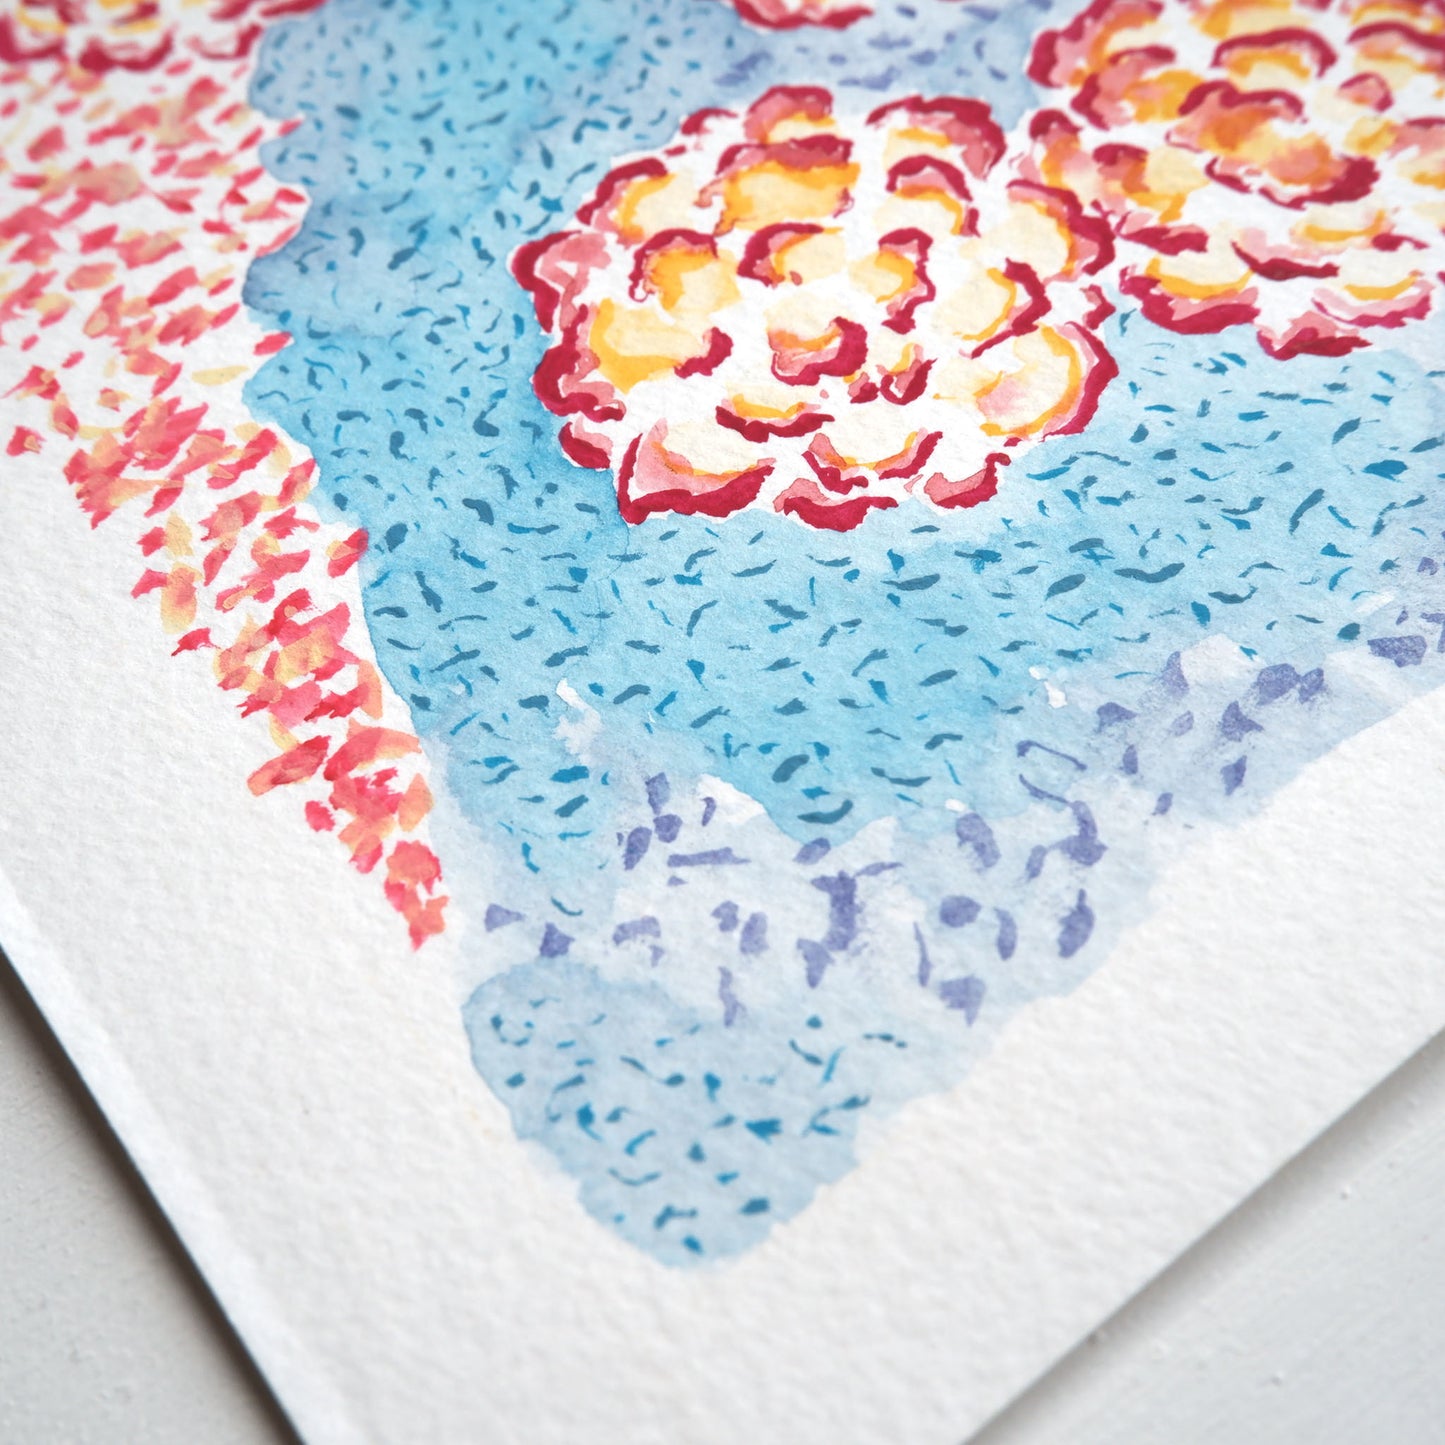 Close-up of textured watercolour paper of Floral Endless original watercolour painting by artist Marissa Schiesser